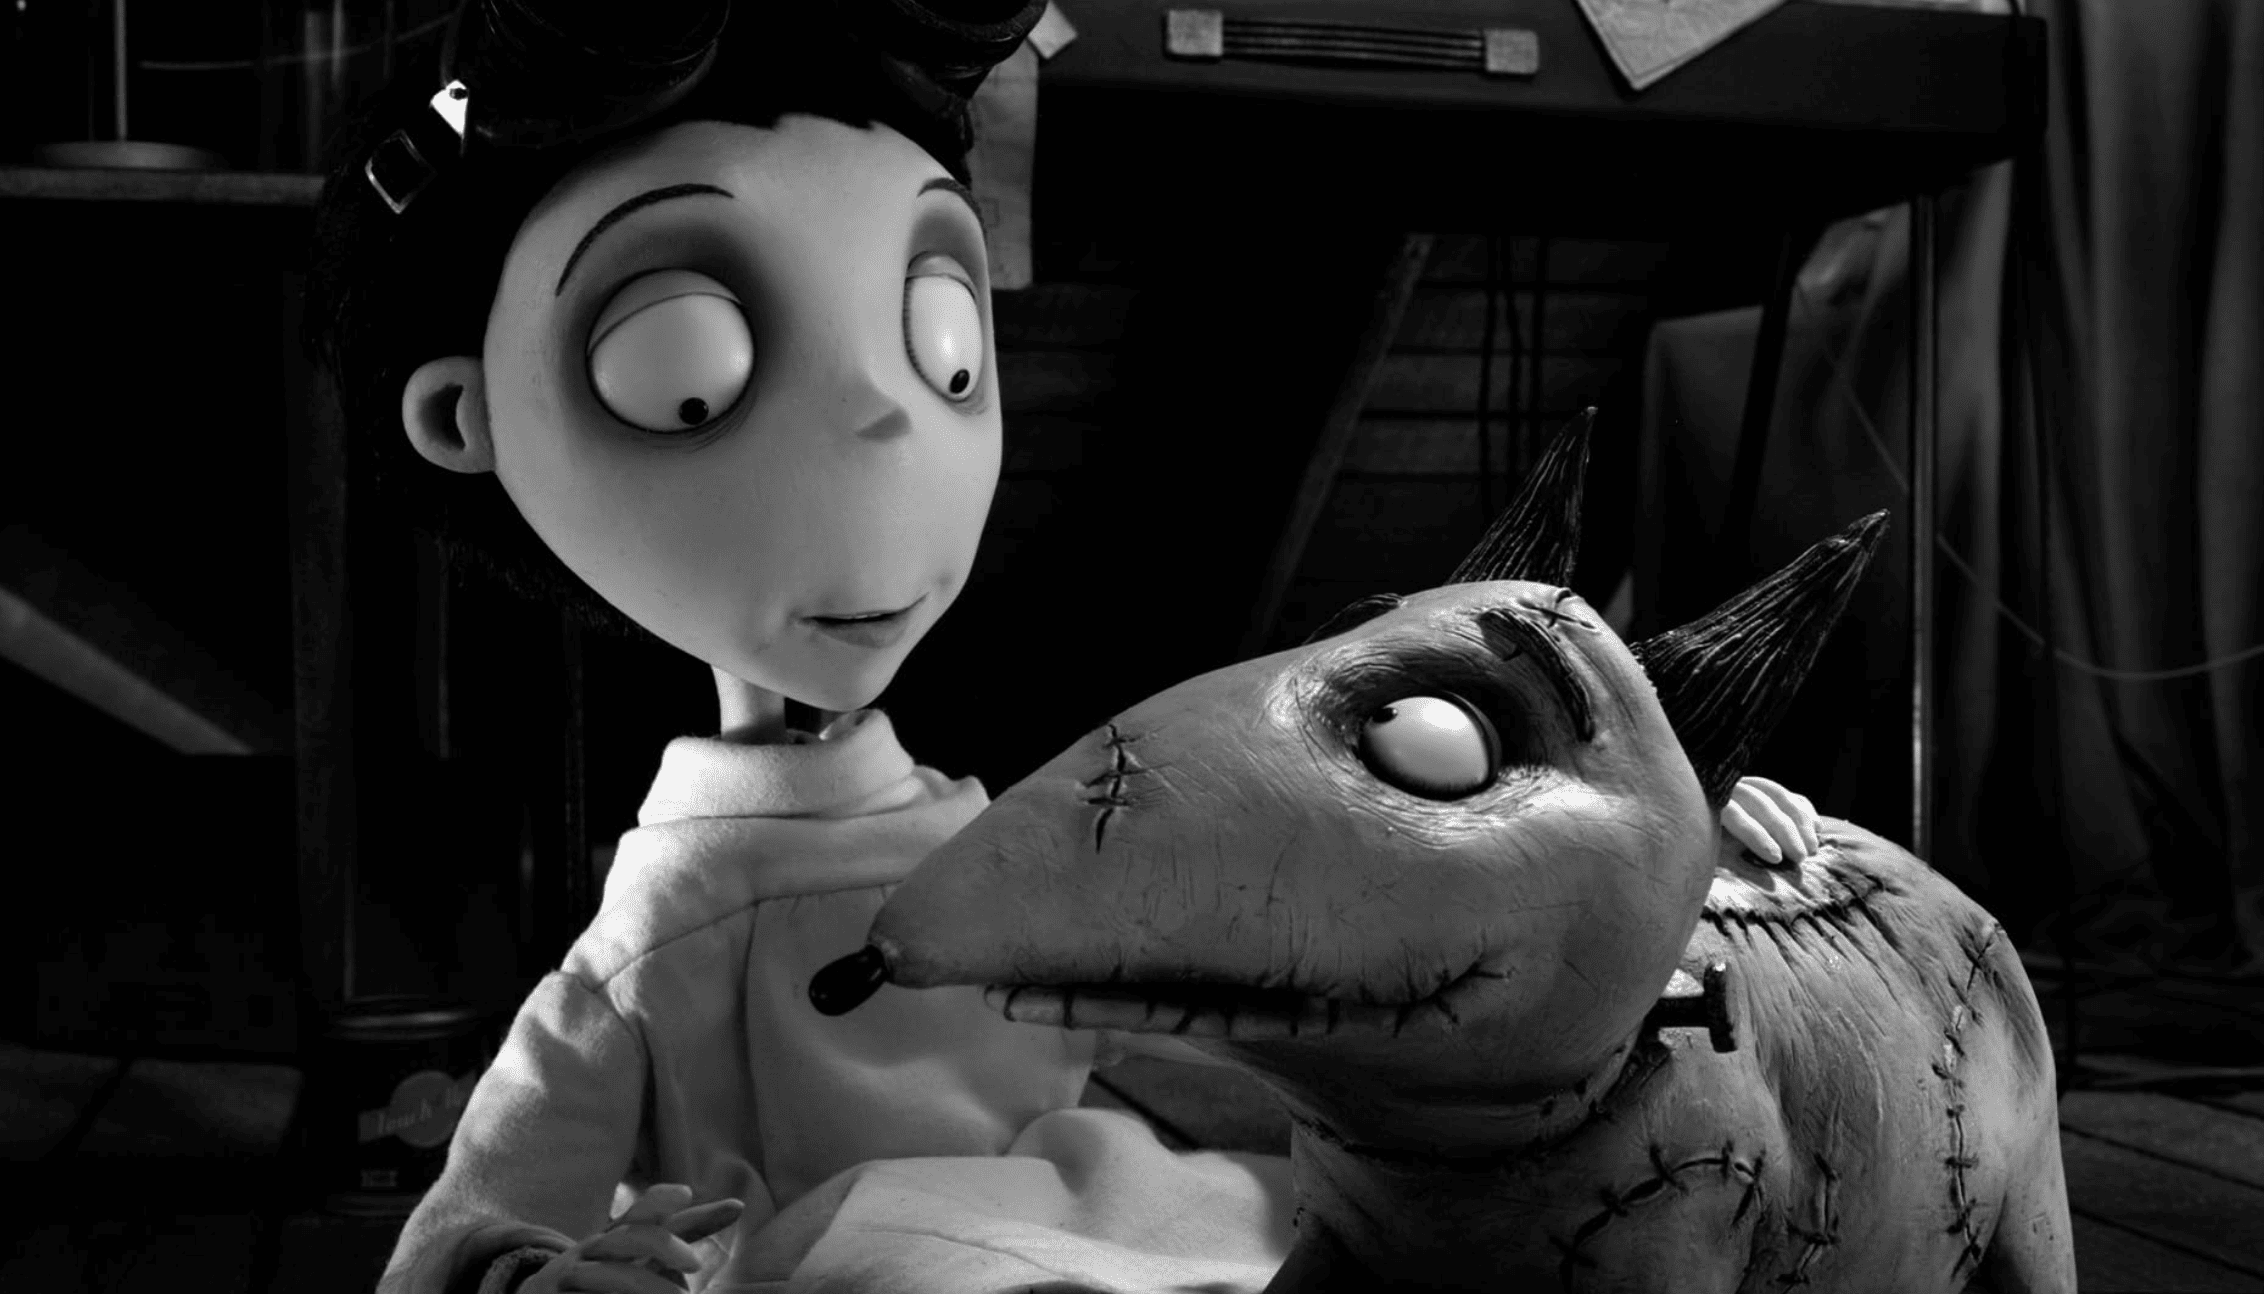 A young boy smiles at his resurrected dog in this image from Tim Burton Productions.